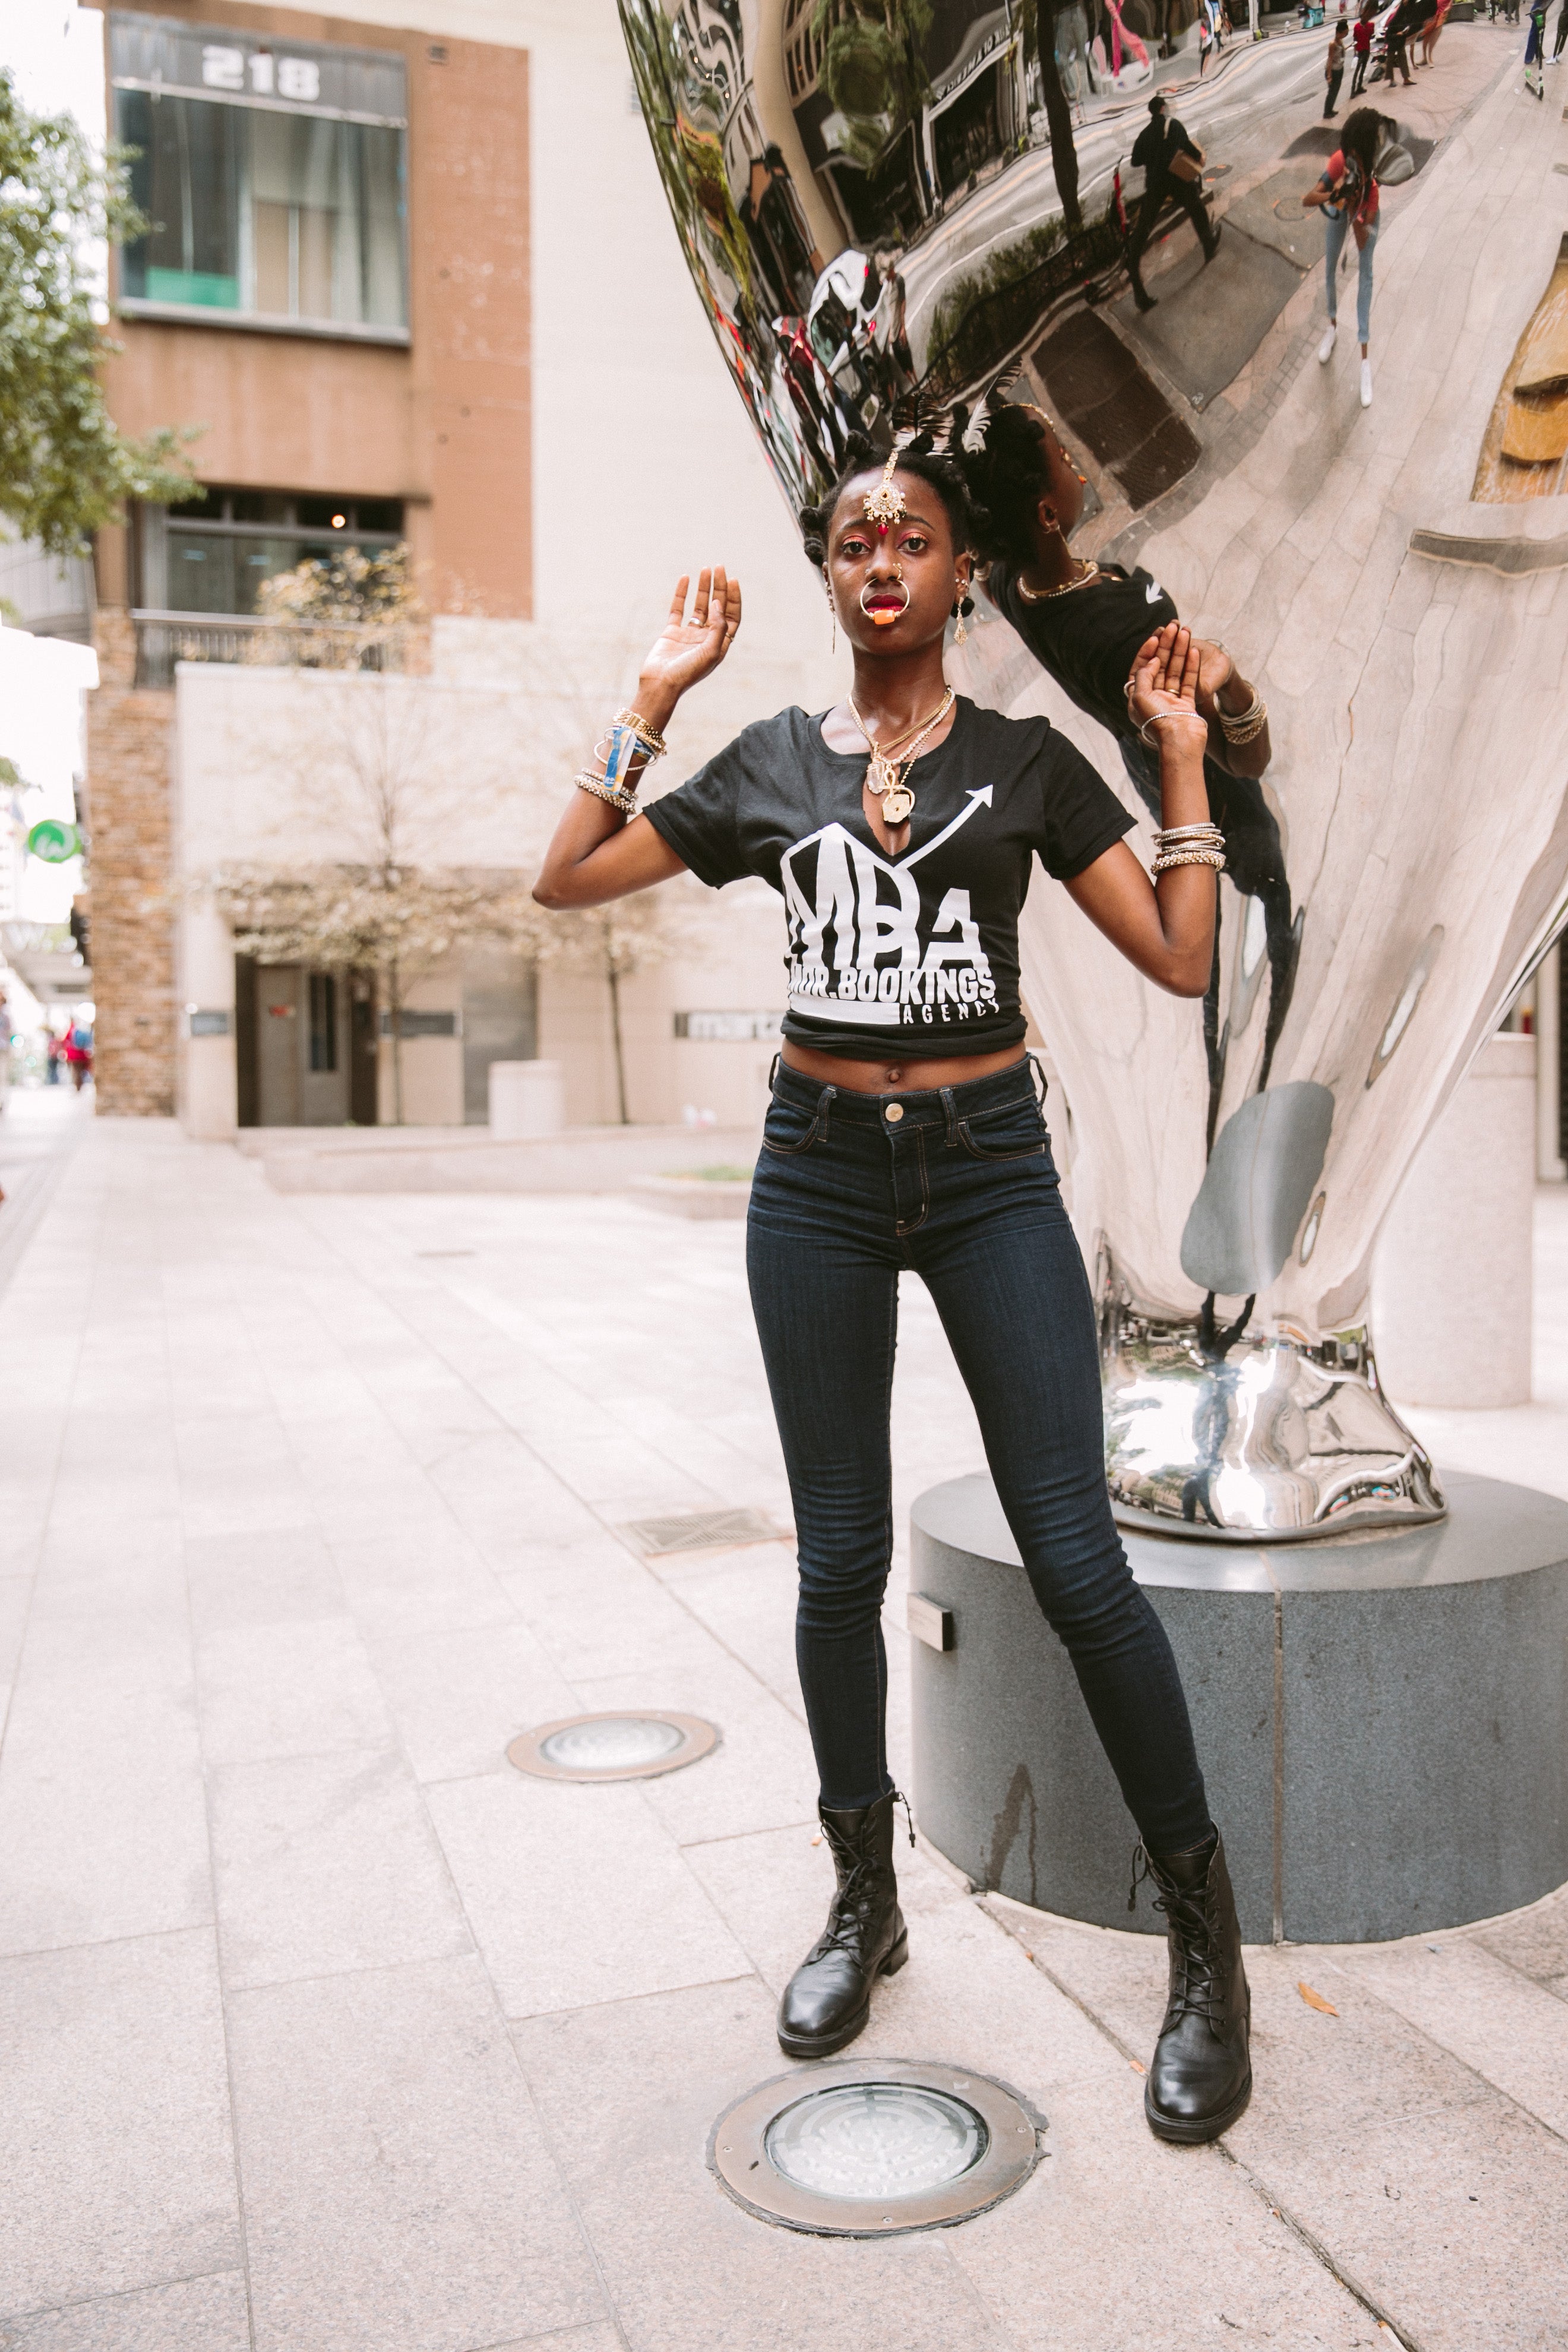 The Best Street Style At Atlanta's A3C Festival